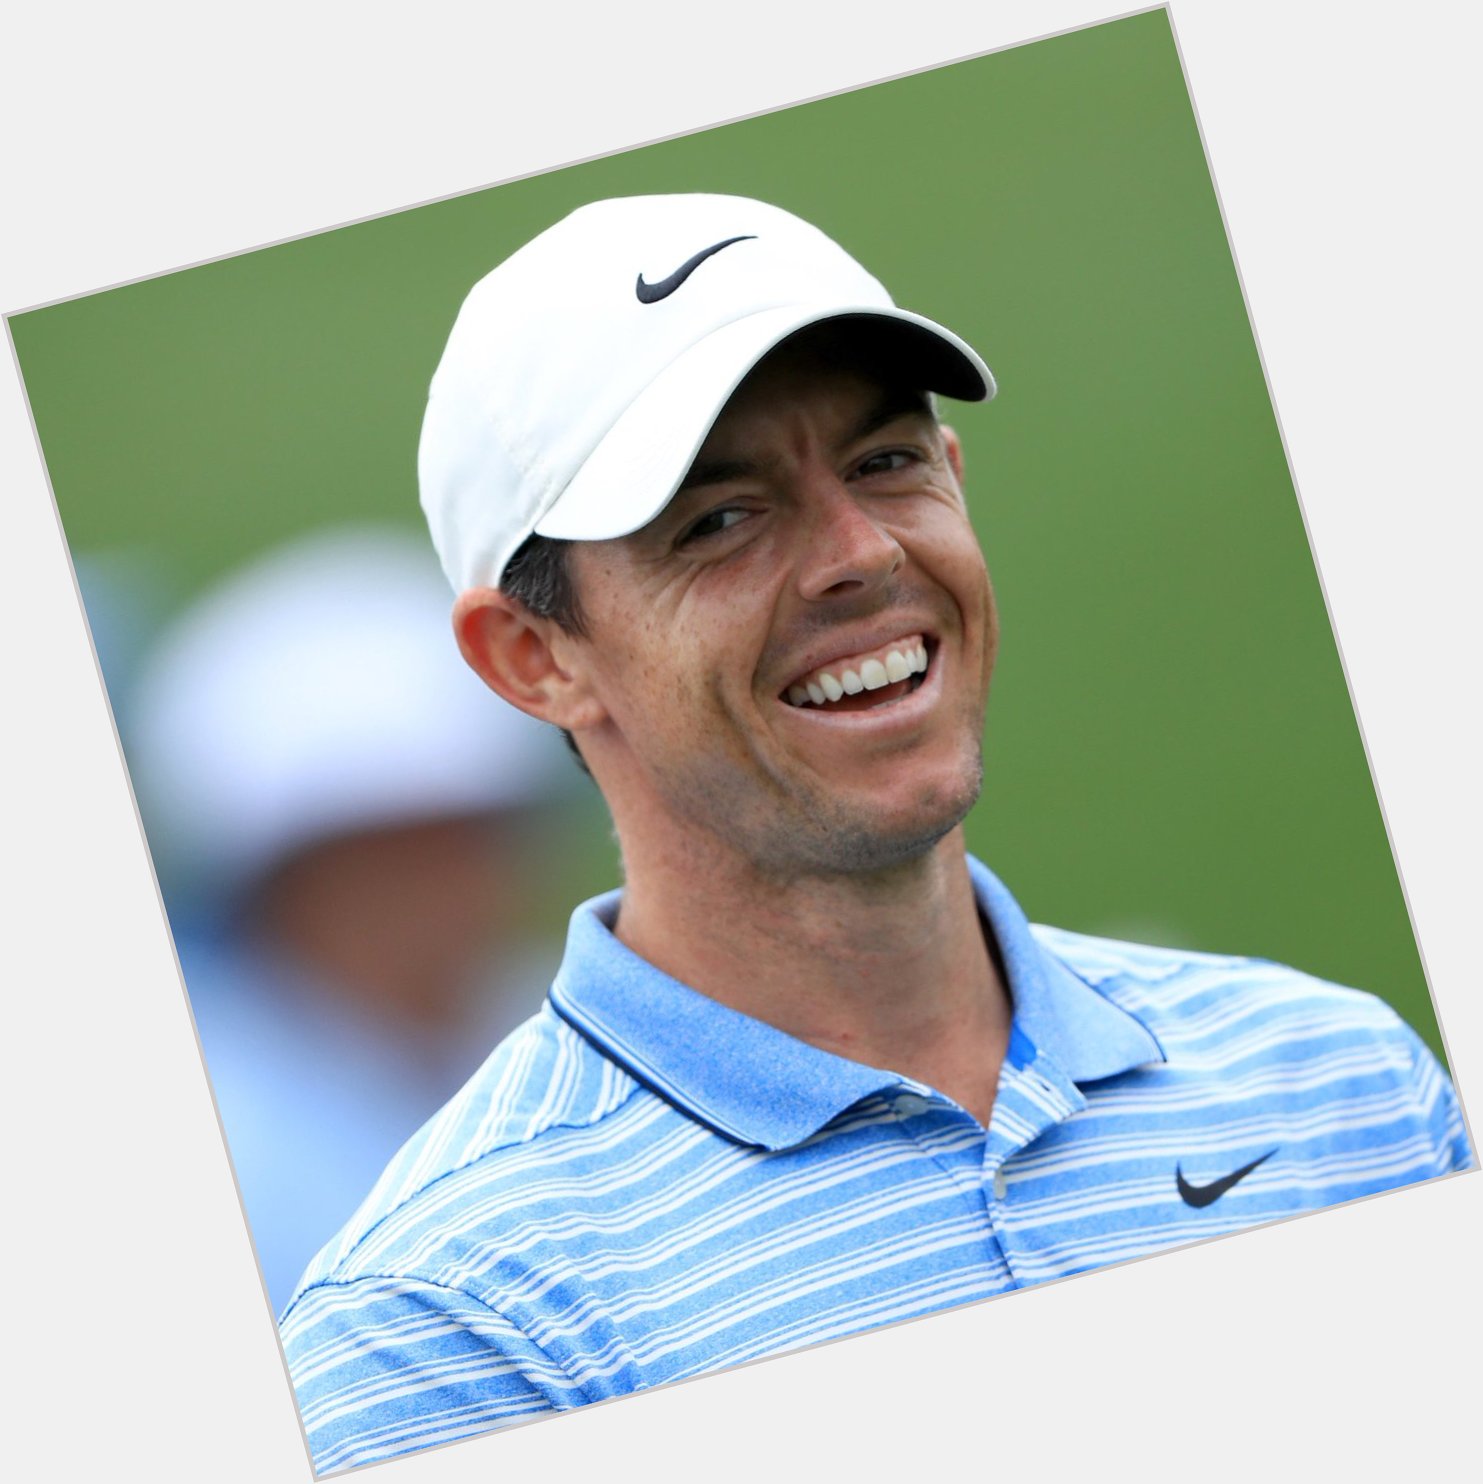 7 Kings Casino & Sportsbook wishes professional golfer Rory McIlroy a Happy 32nd Birthday! 